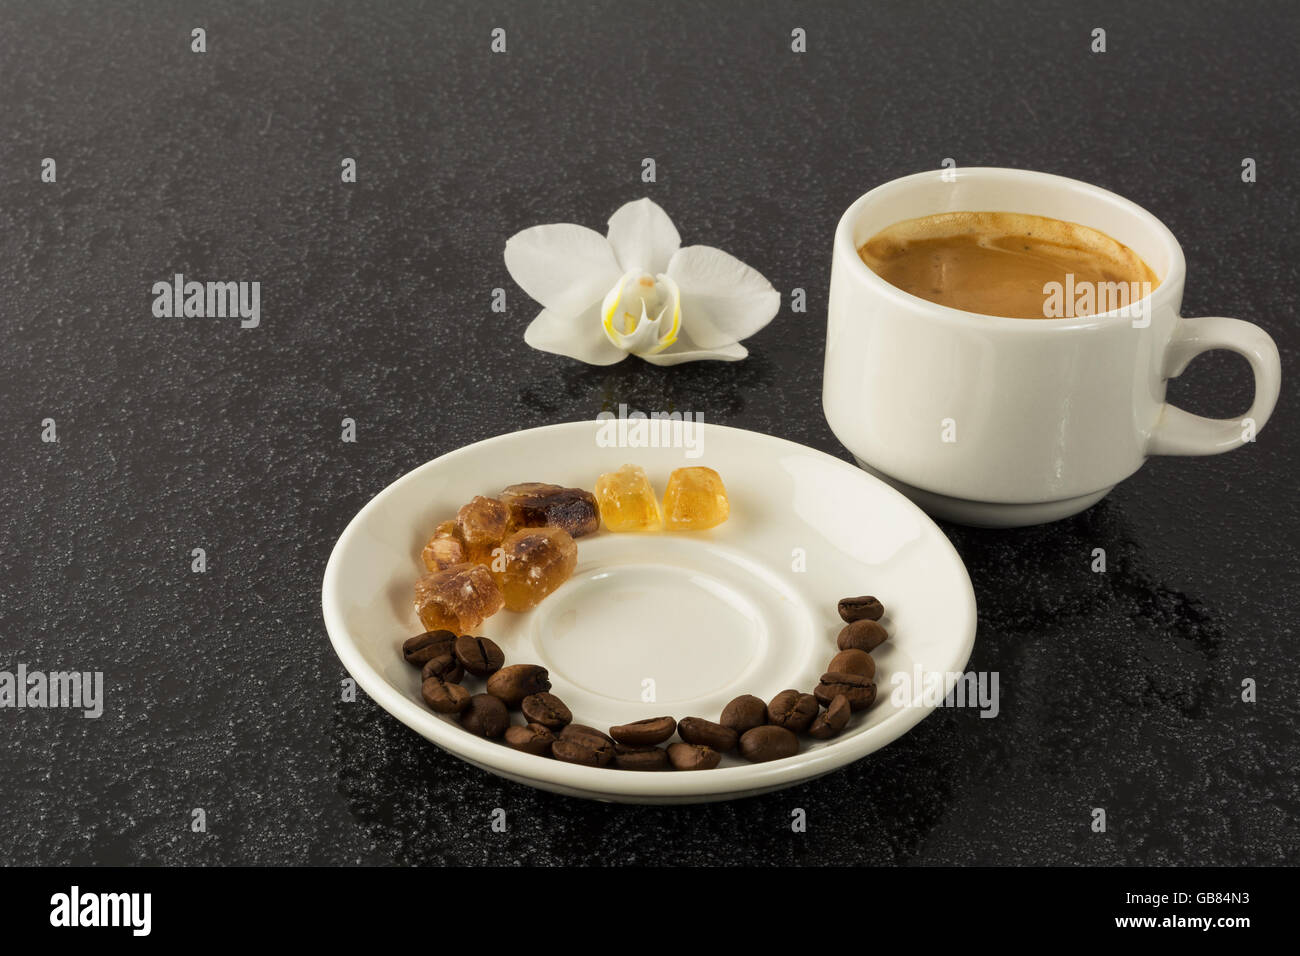 Coffee grains, cup of coffee and orchid. Coffee cup. Strong coffee. Coffee mug. Morning coffee. Cup of coffee. Coffee break. Stock Photo